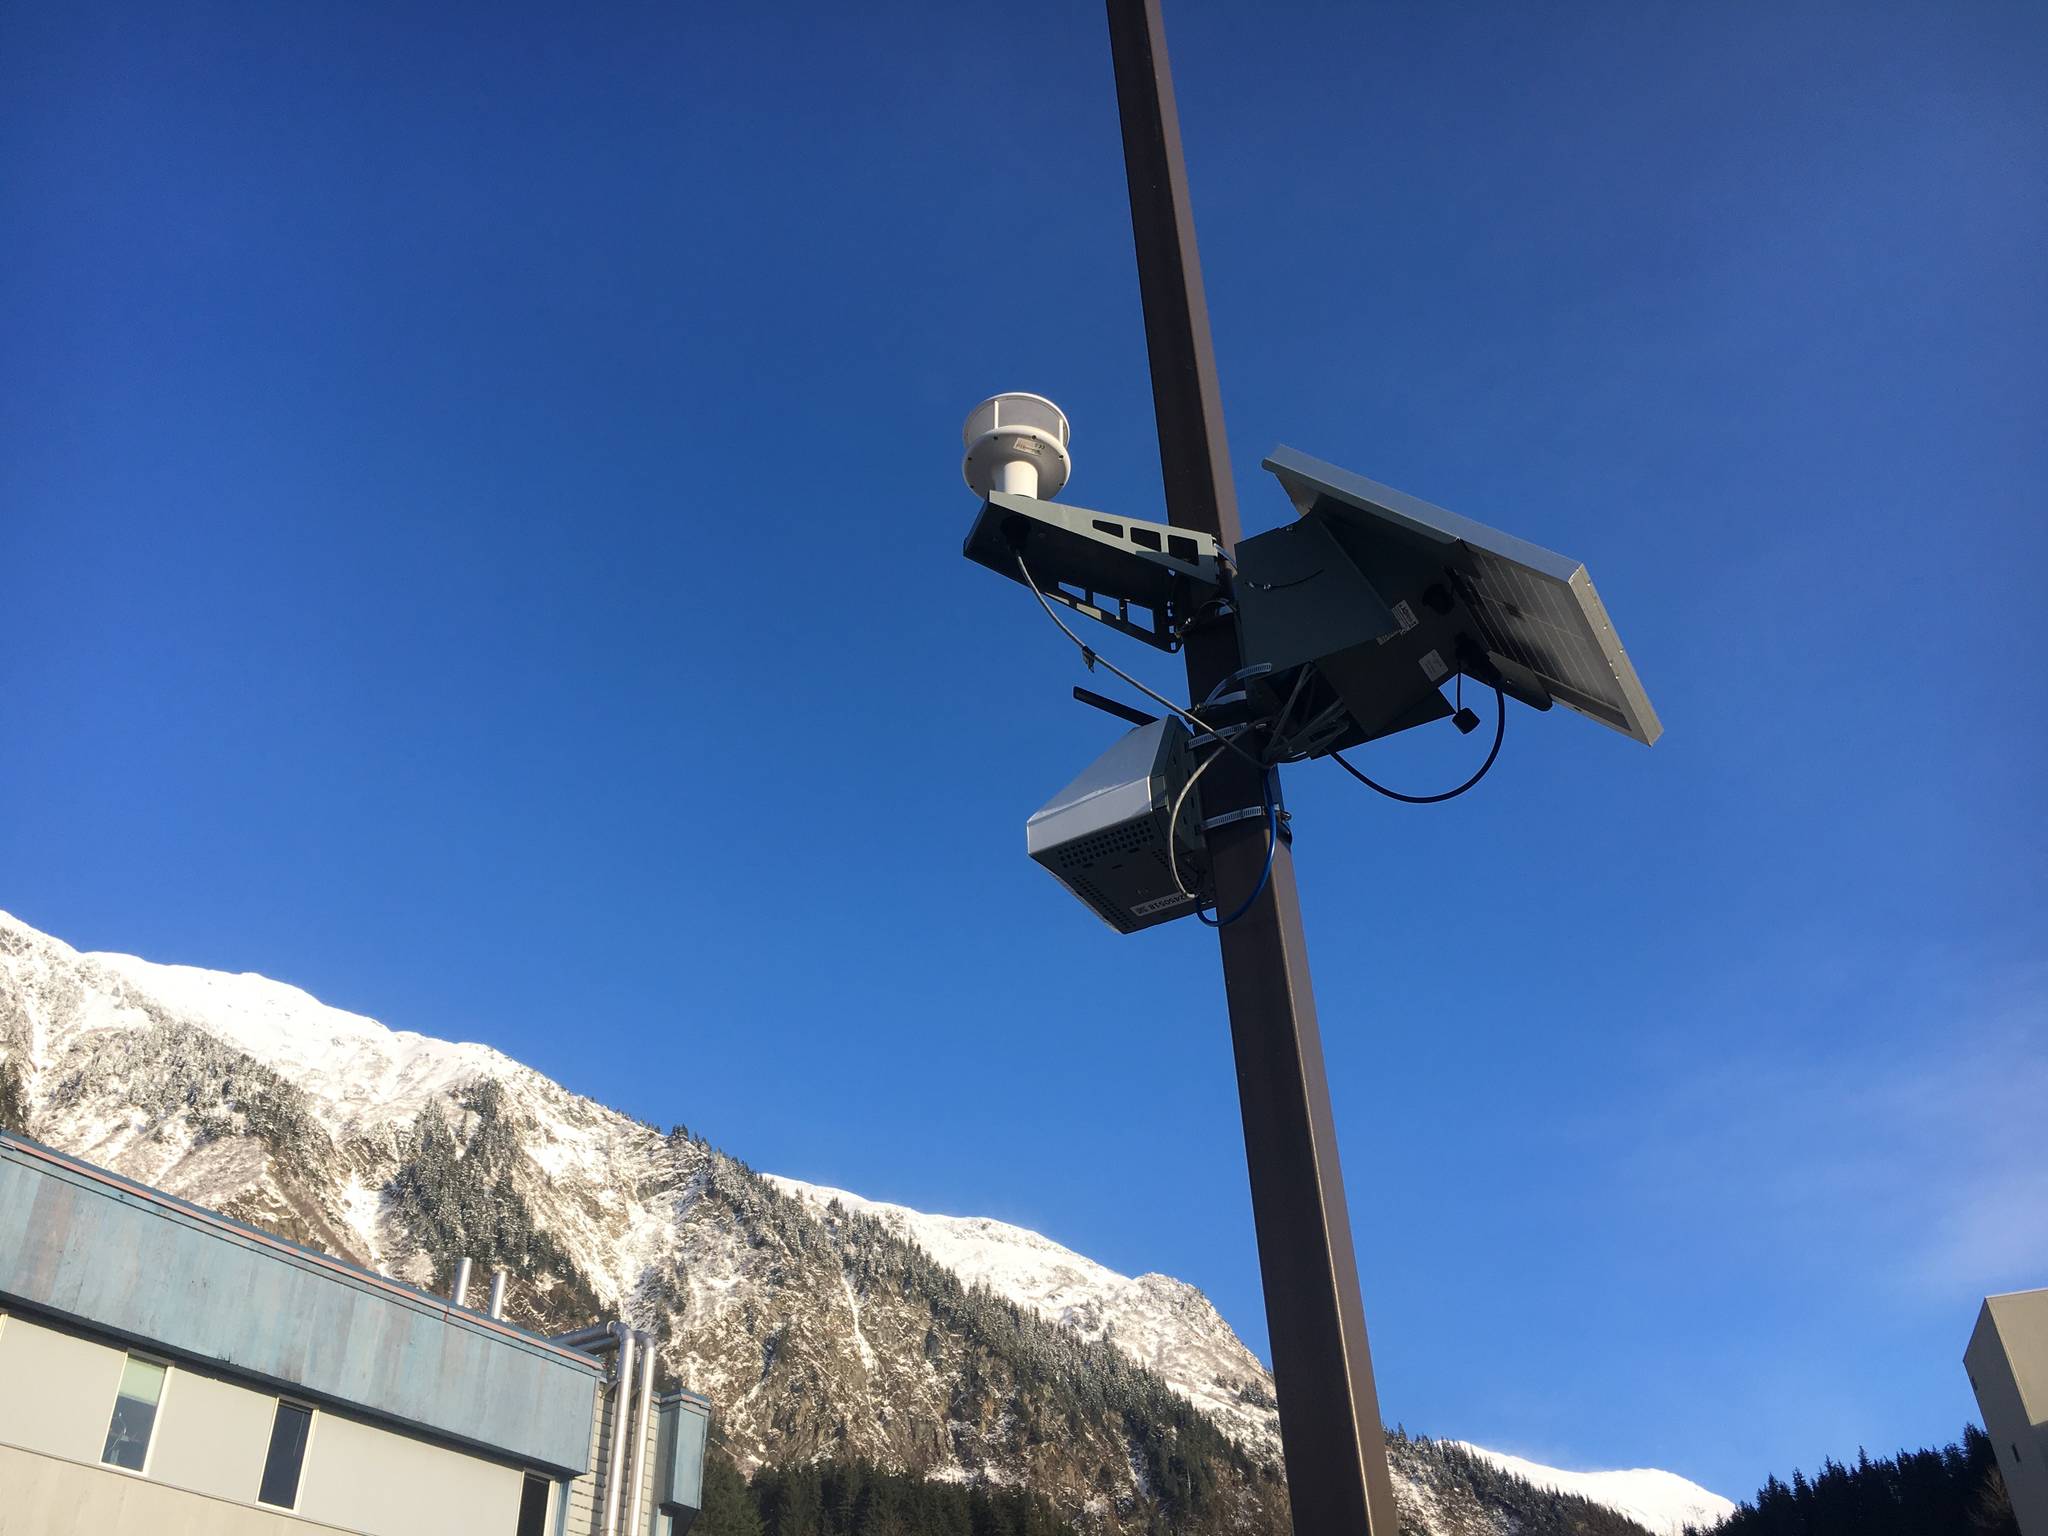 The Alaska Department of Environmental Conservation has installed three air quality sensors, like the one pictured here off of Whittier Avenue on Nov. 16, 2020, around Juneau to mention the effects of cruise ships on air quality, following an inconclusive 2019 study. (Michael S. Lockett / Juneau Empire)